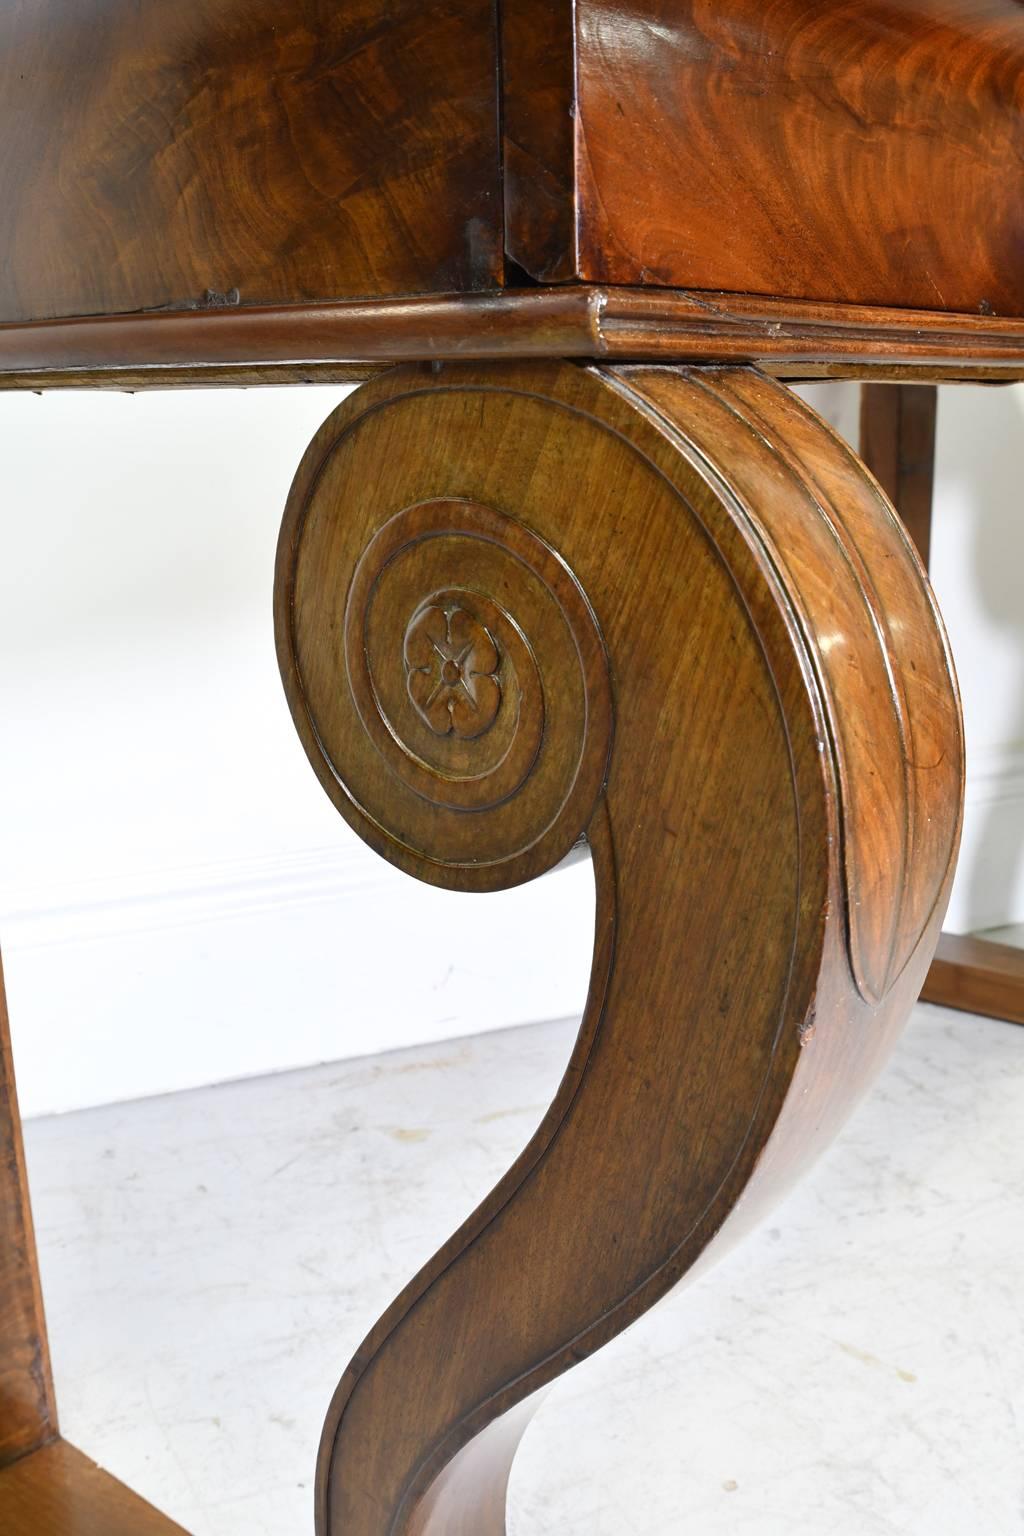 Early 19th Century French Empire Console Table in Mahogany w/ White Carrara Marble Top, circa 1800